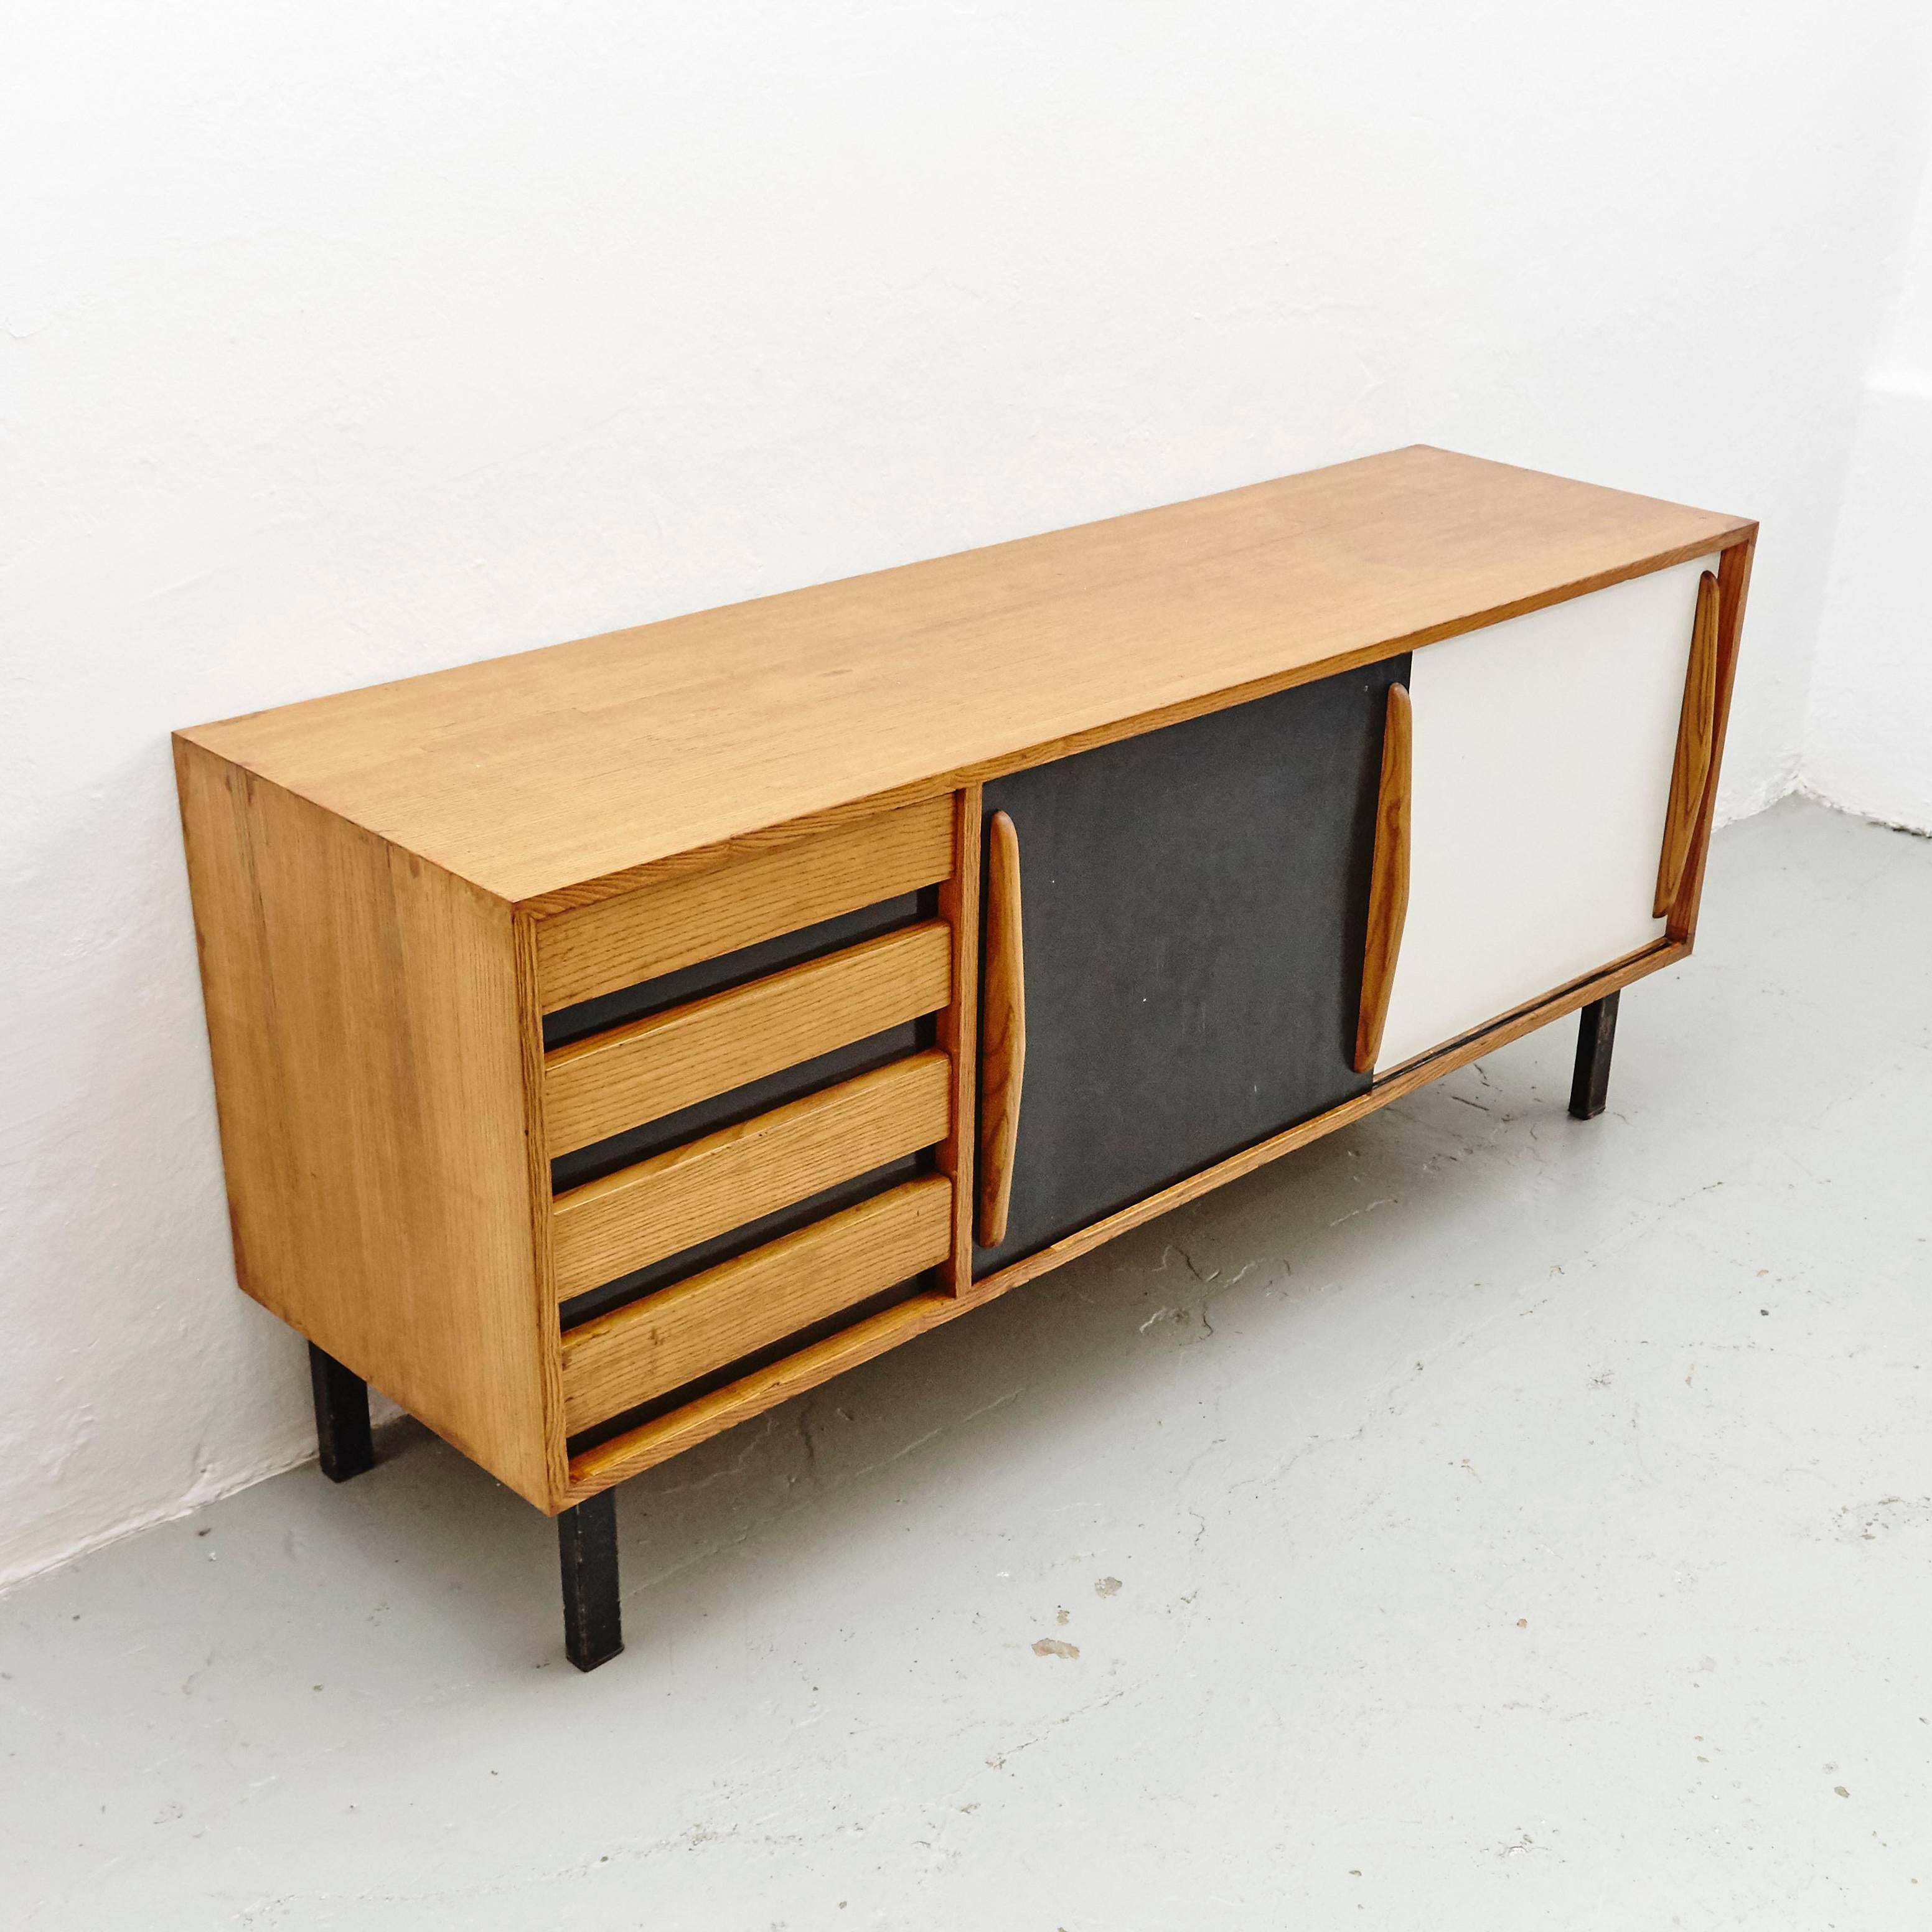 French Charlotte Perriand Mid-Century Modern Cansado Sideboard, circa 1950